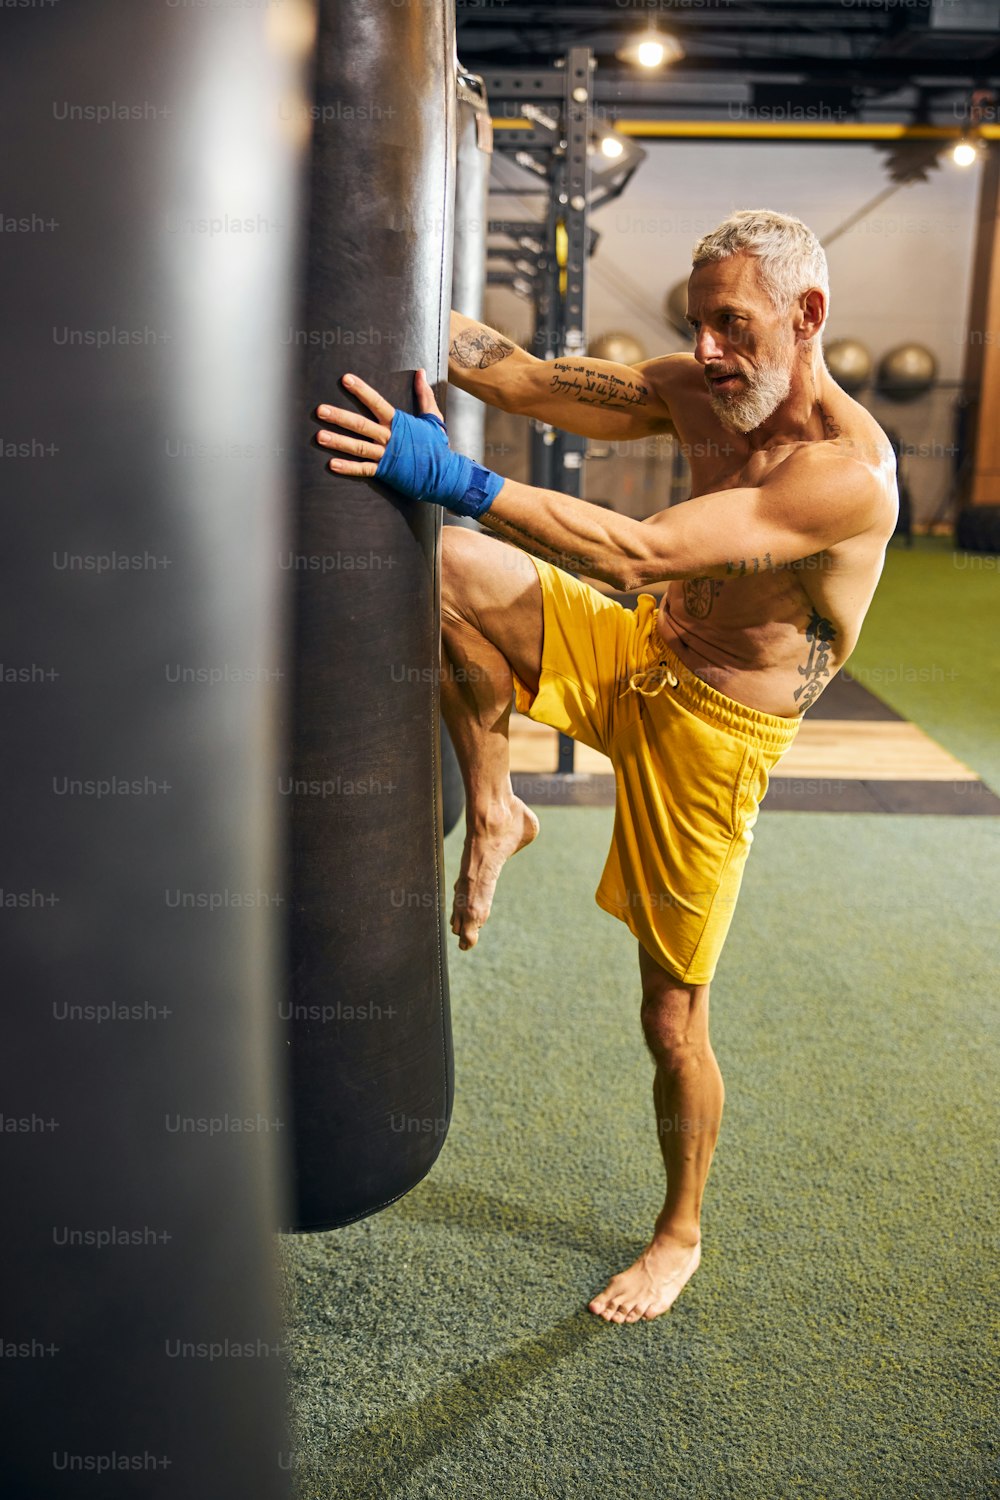 Full-sized portrait of a gray-headed bearded barefoot shirtless Caucasian male athlete kneeing the punching bag